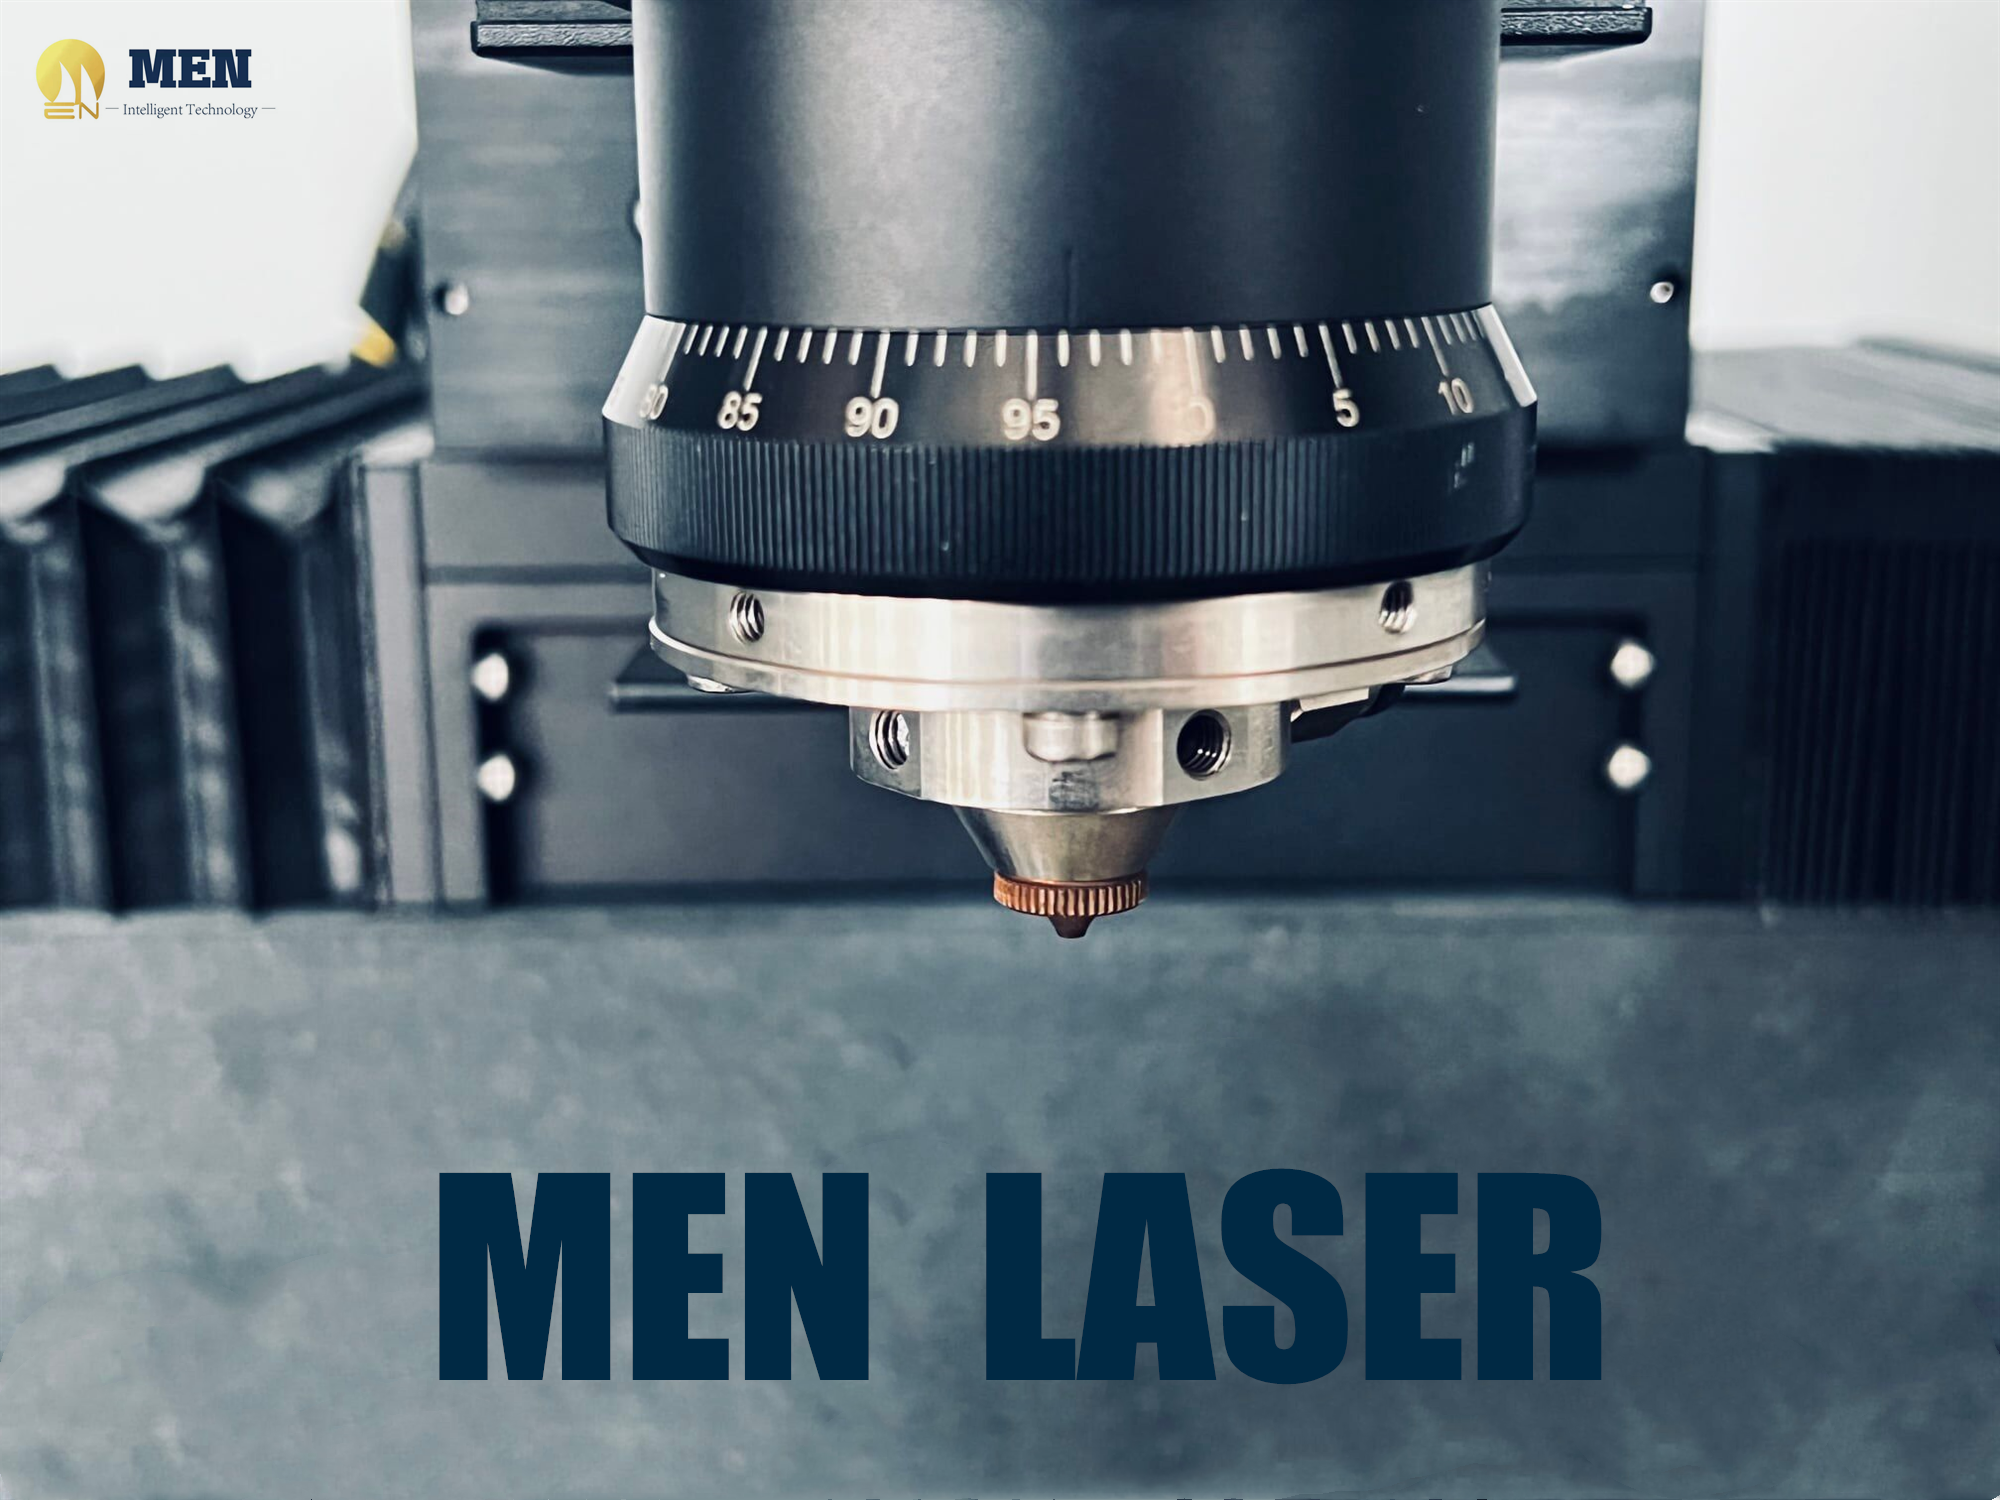 Development trend and prospect of China’s laser industry in 2025